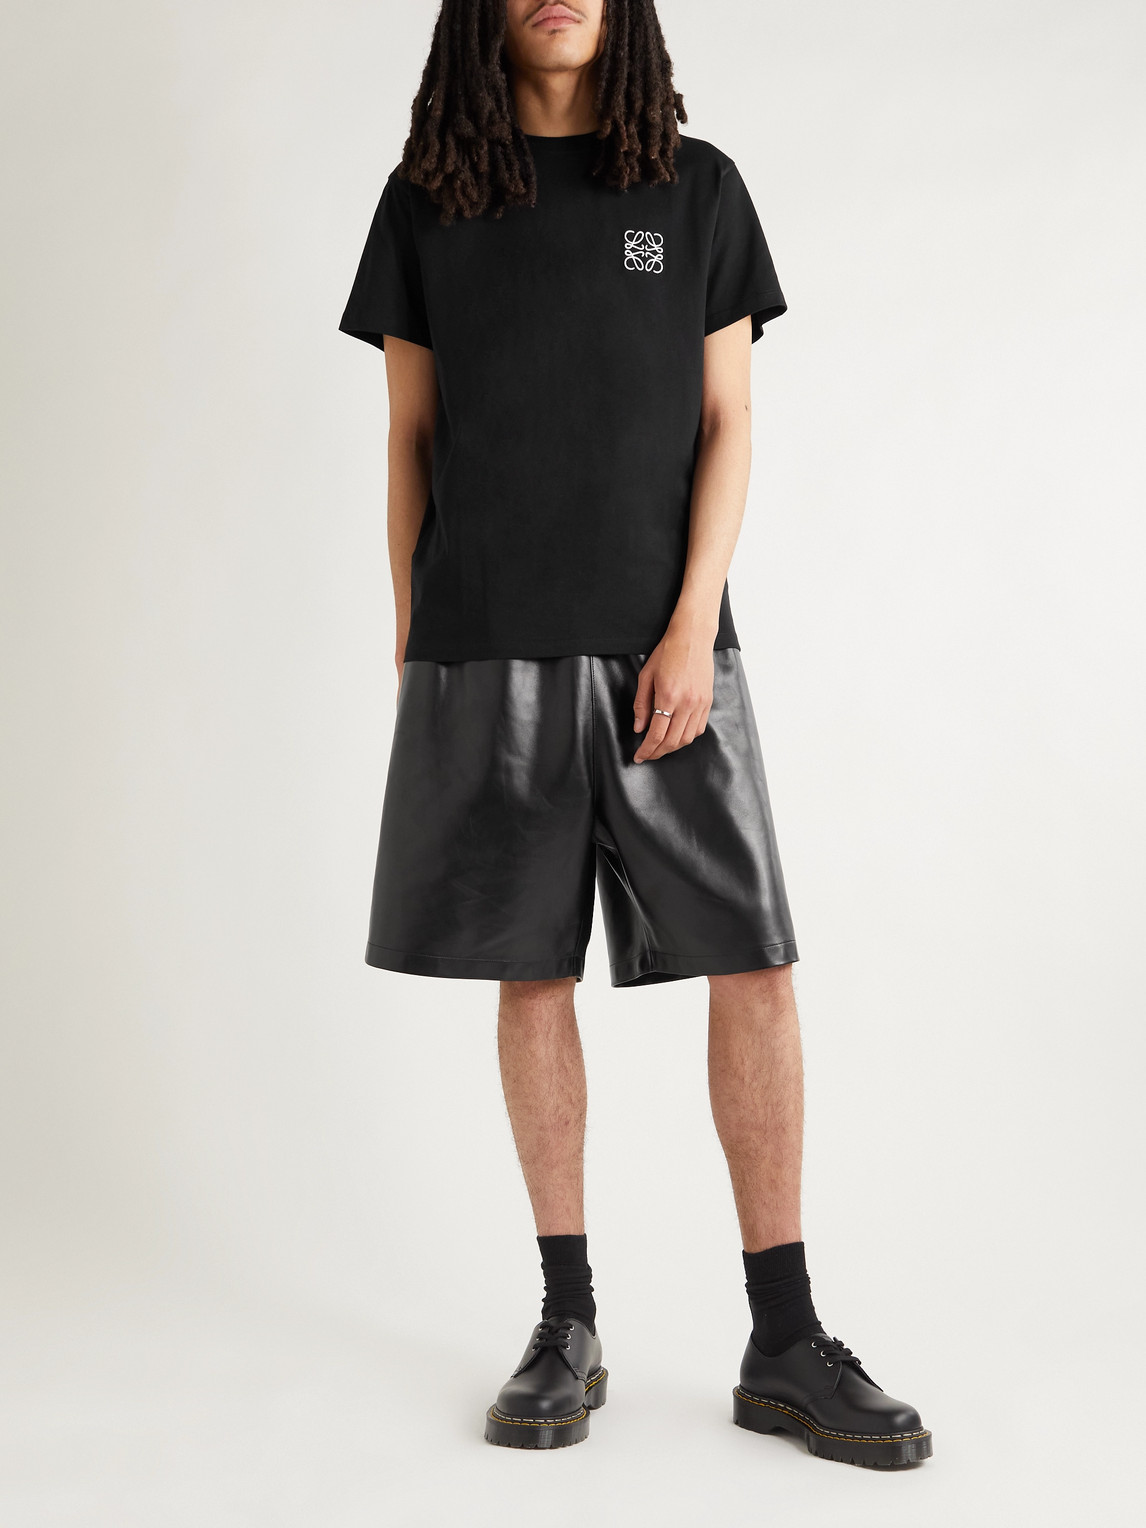 Shop Loewe Logo-embroidered Cotton-jersey T-shirt In Black